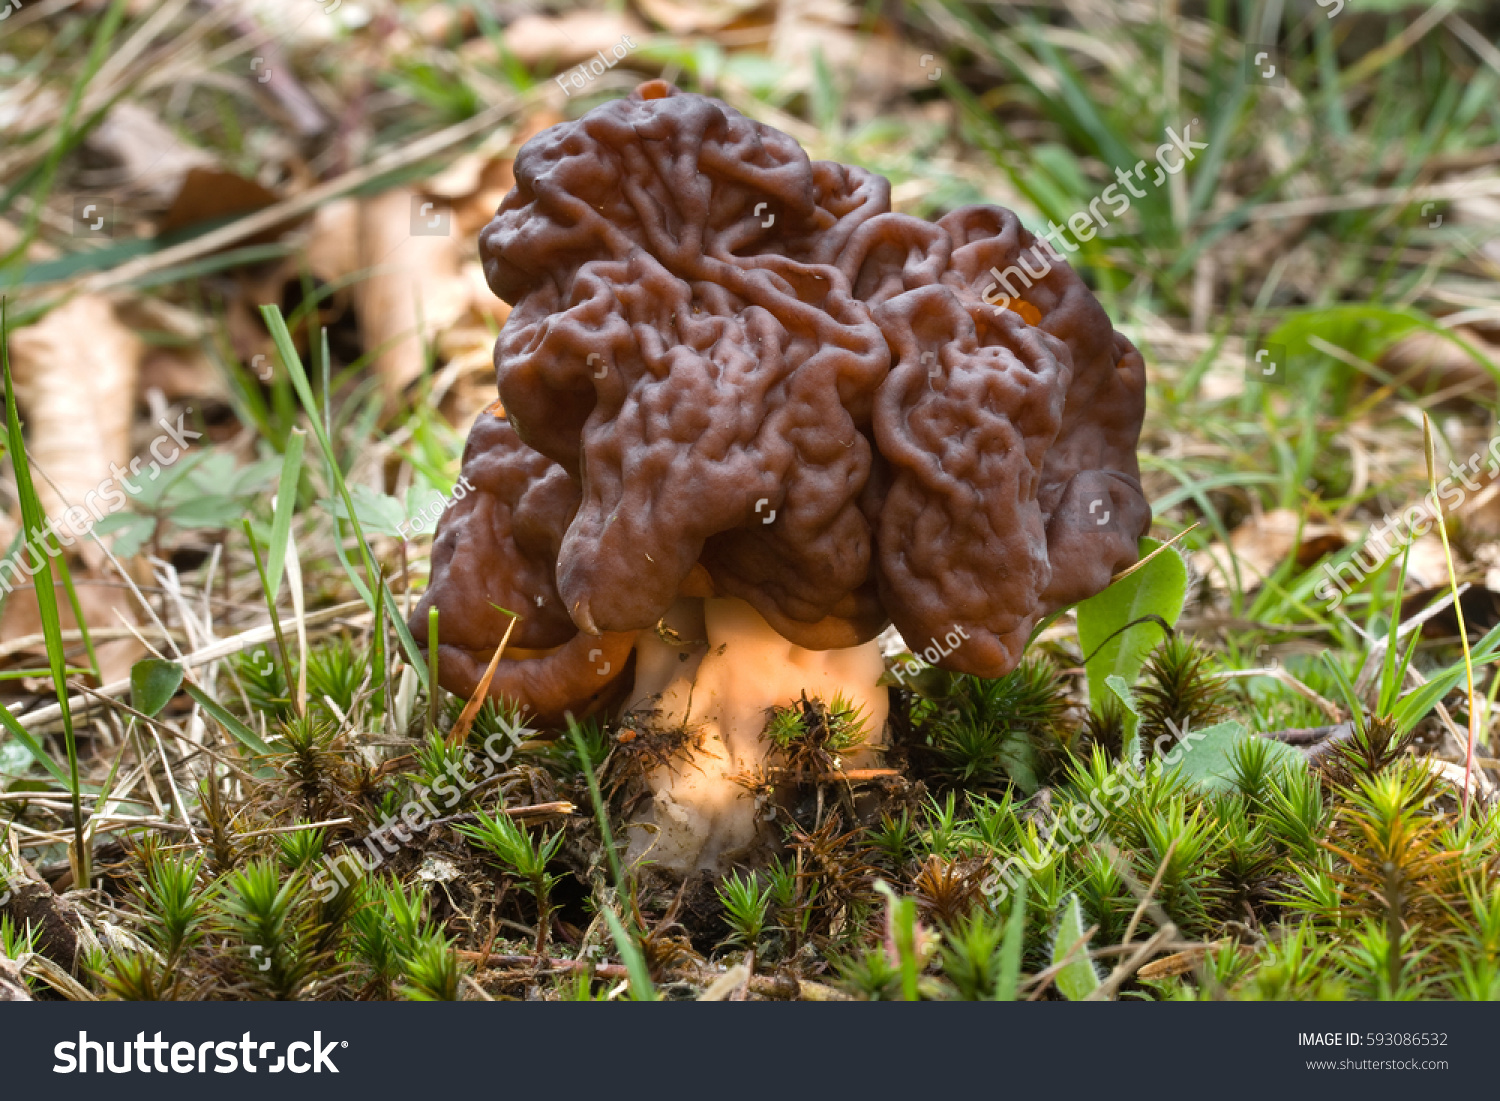 Gyromitra Esculenta known as False morel. Photo has been taken in the natural forest background. #593086532